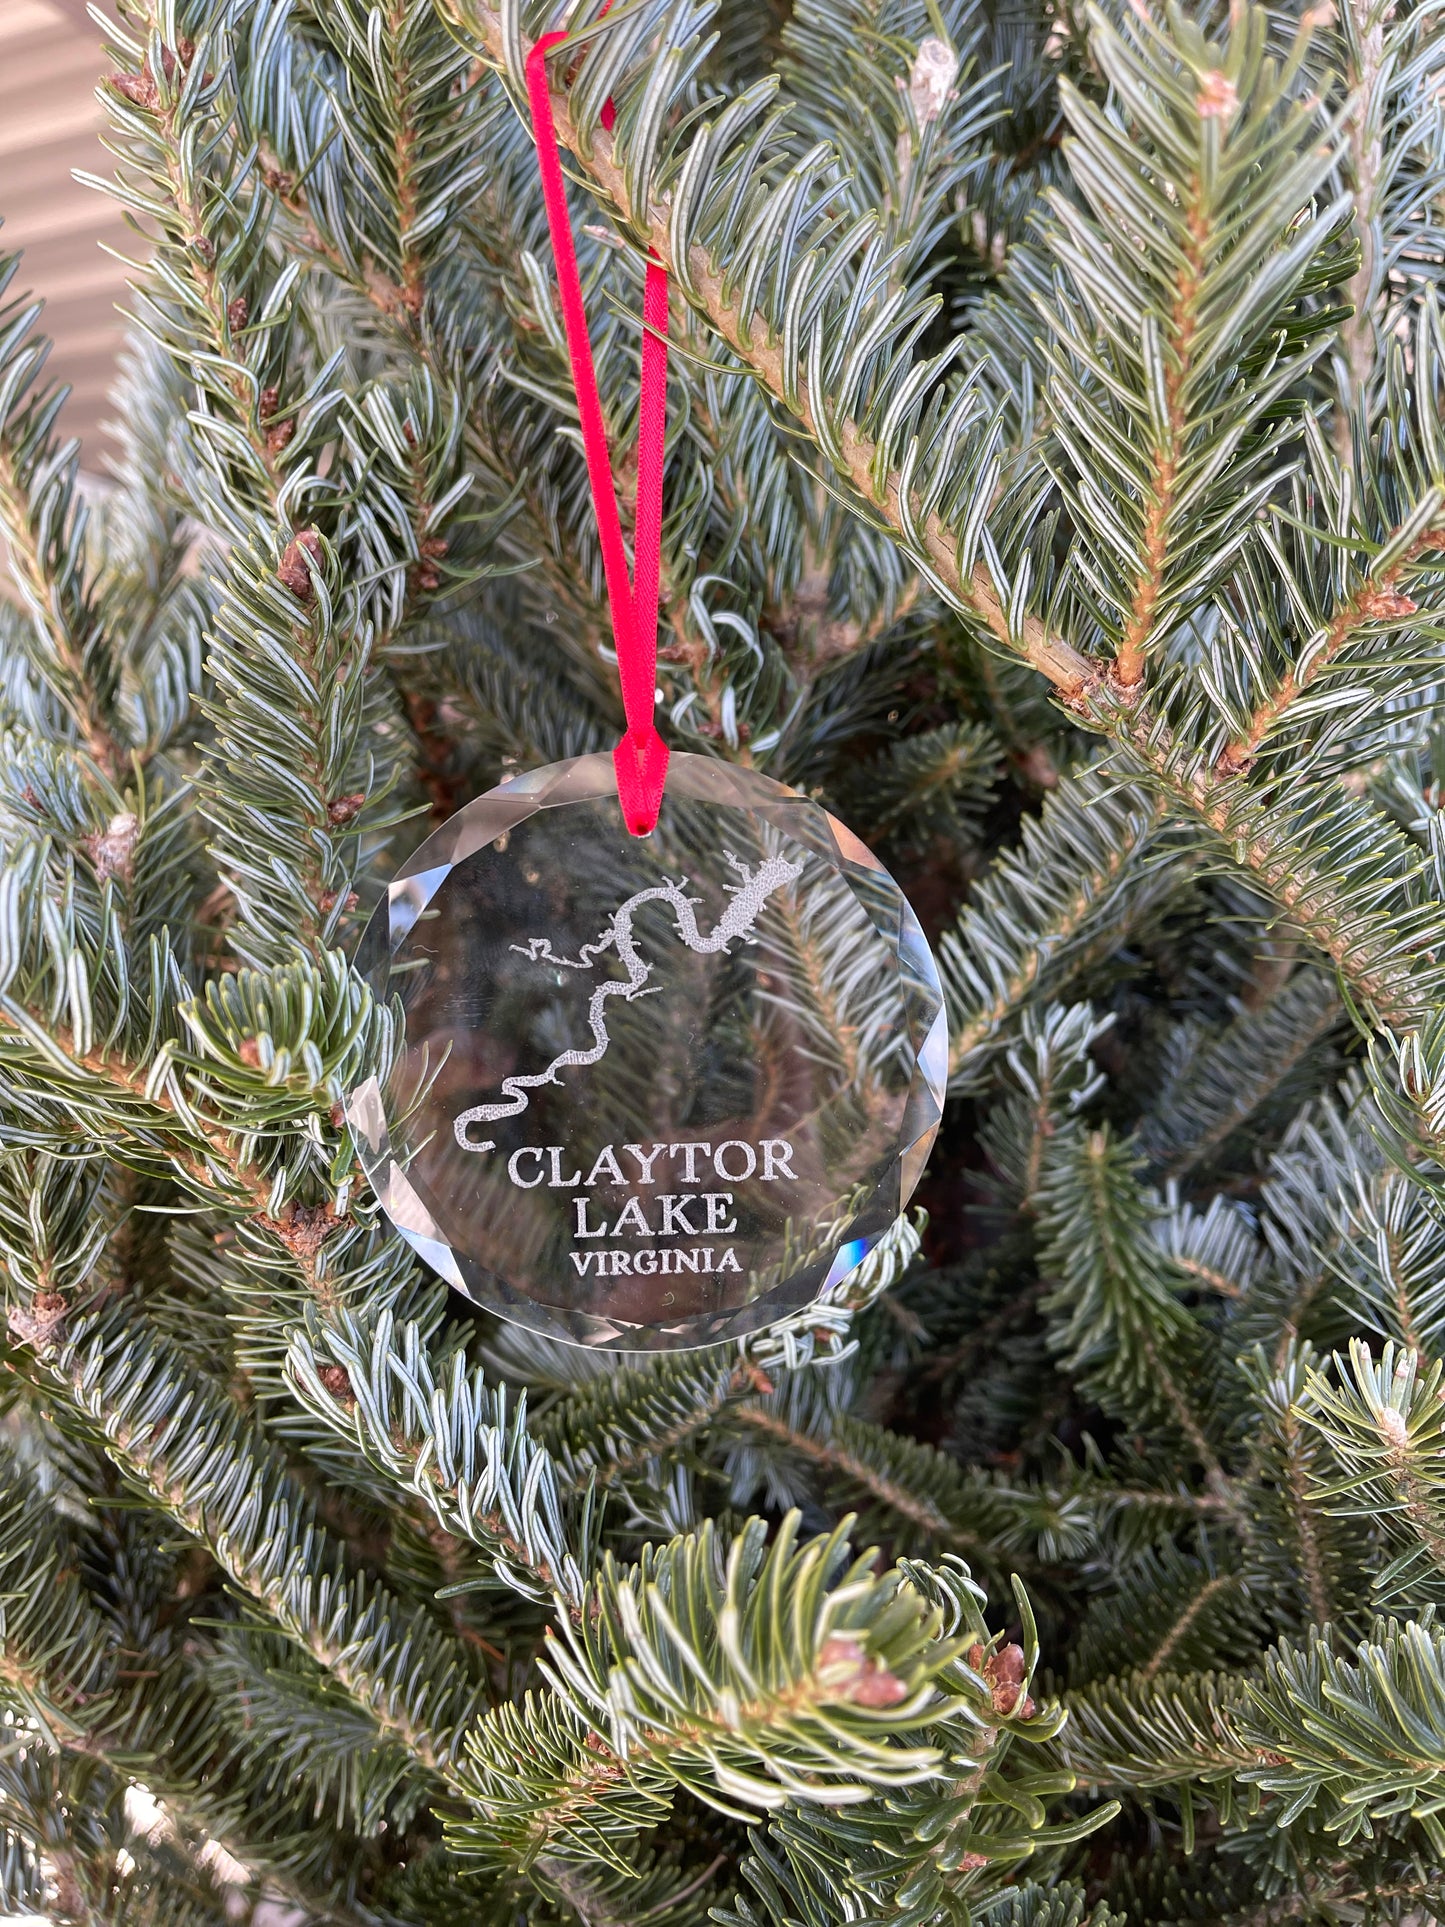 Claytor Lake Etched Crystal Ornament